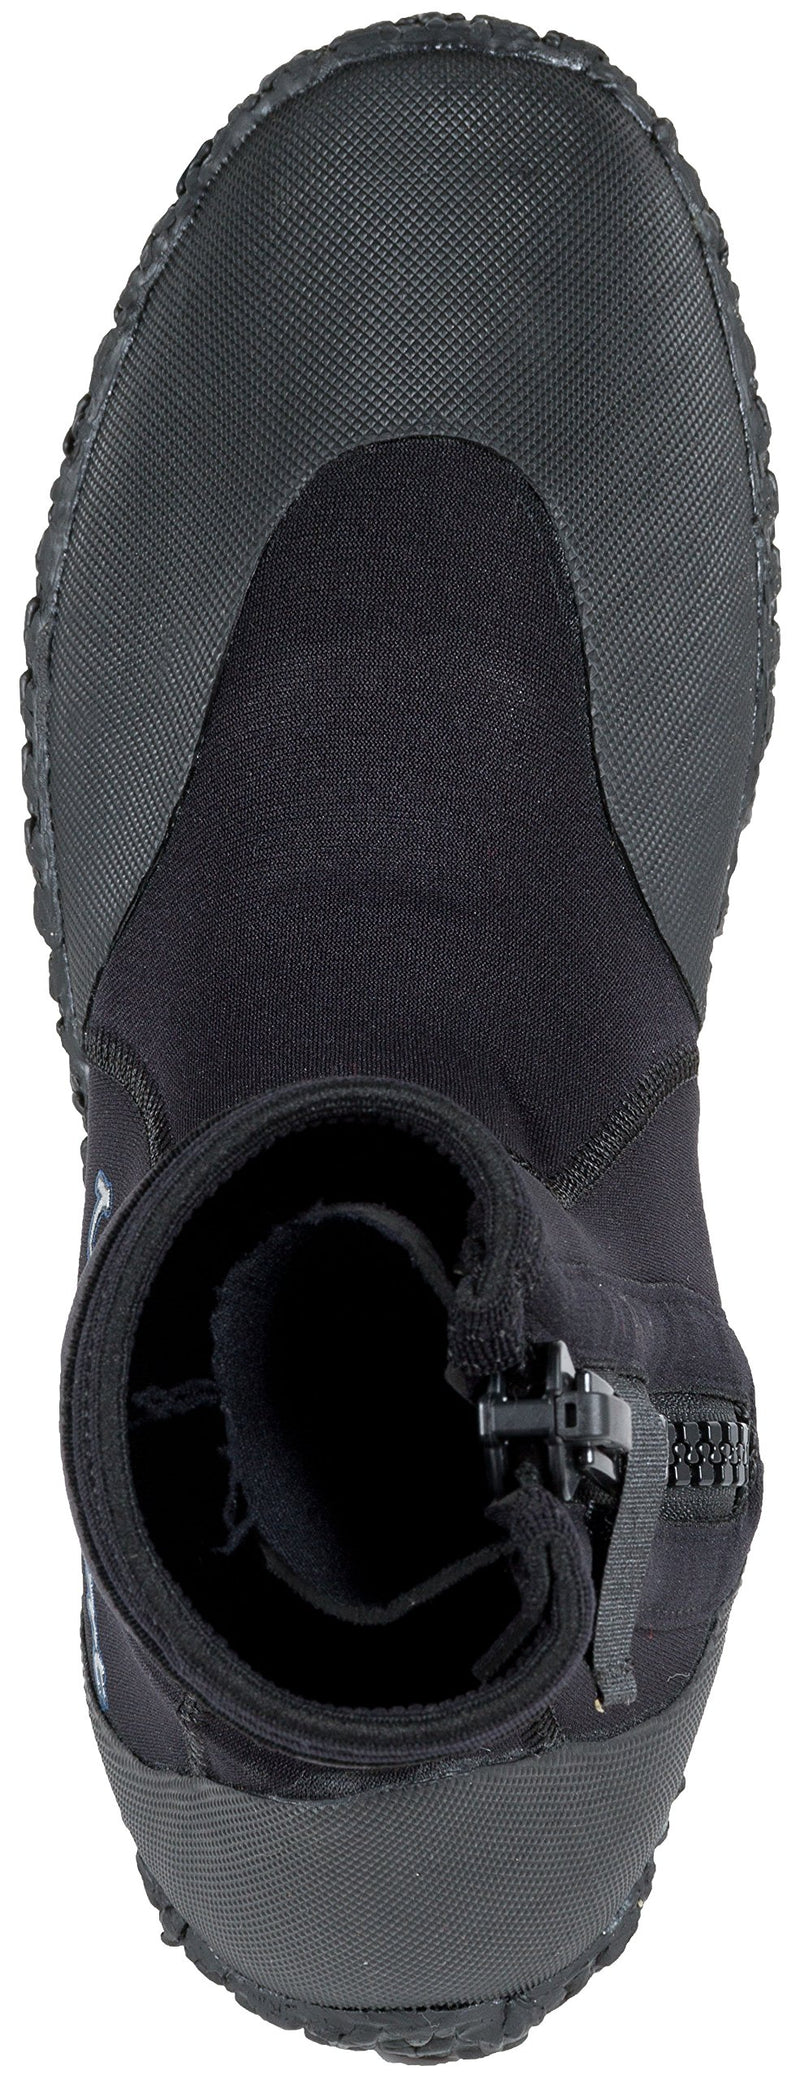 Neo Sport Premium Neoprene Men & Women Wetsuit Boots, Shoes with puncture resistant sole 3mm, 5mm & 7mm for warm, moderate or cold water for watersports: beach, boat, lake, mud, kayak and more! Sizes 4 - 16 Men's 10 / Women's 11 - BeesActive Australia